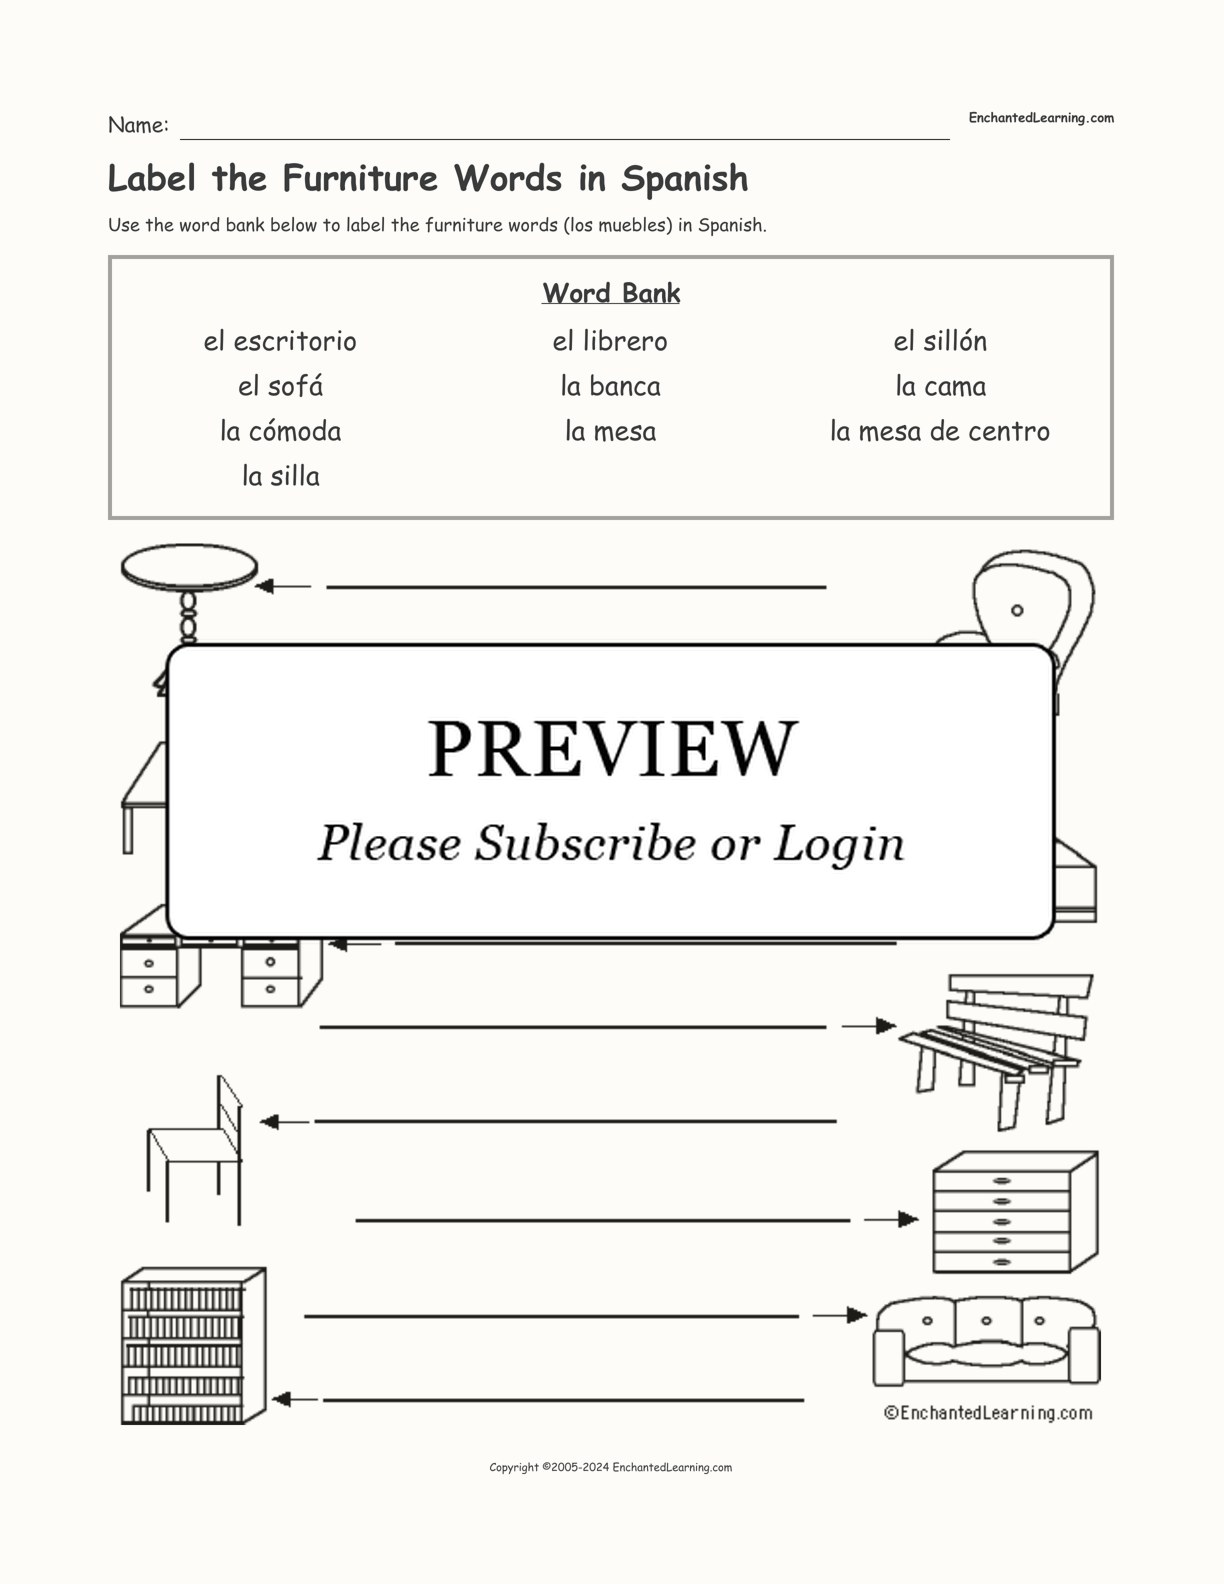 Label the Furniture Words in Spanish interactive worksheet page 1